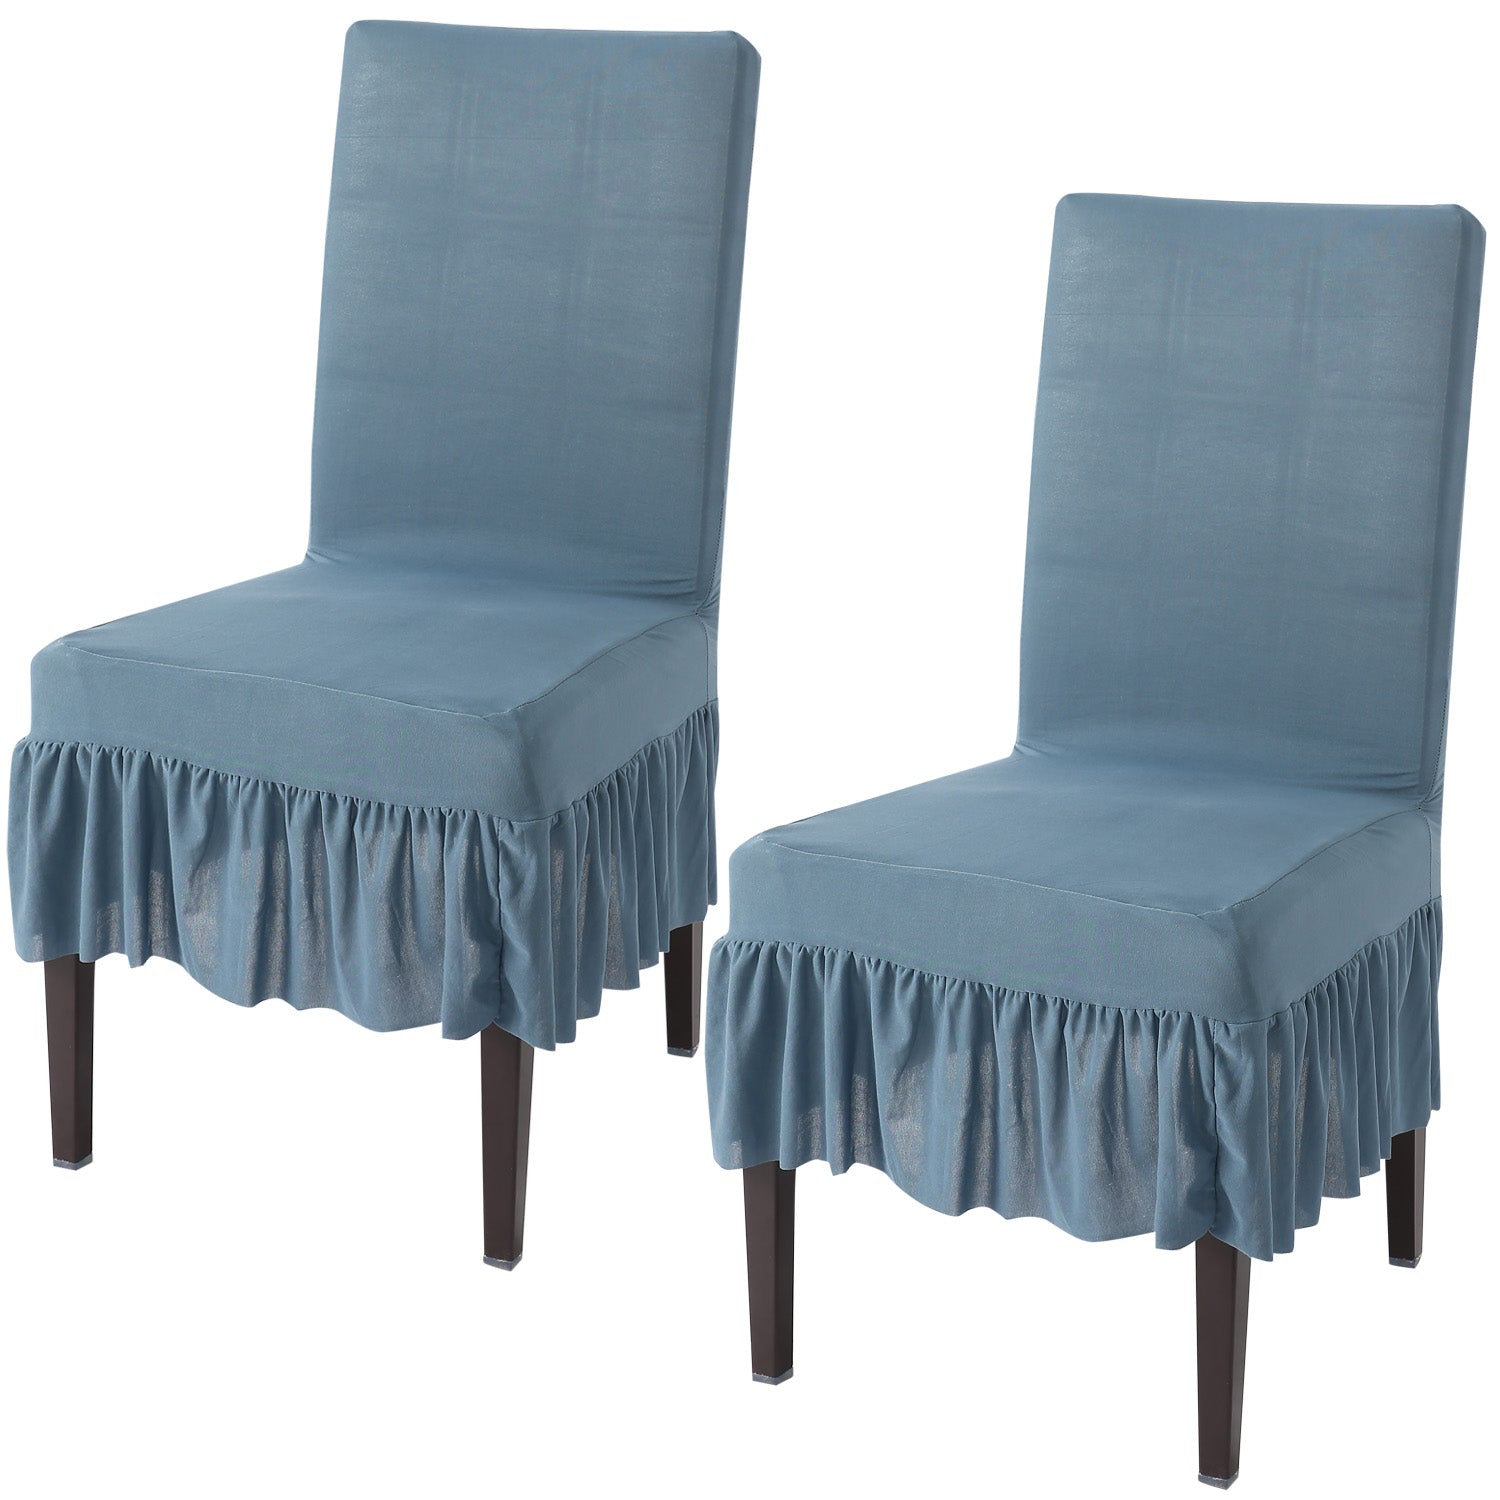 Elastic Stretchable Dining Chair Cover with Frill, Bluish Grey